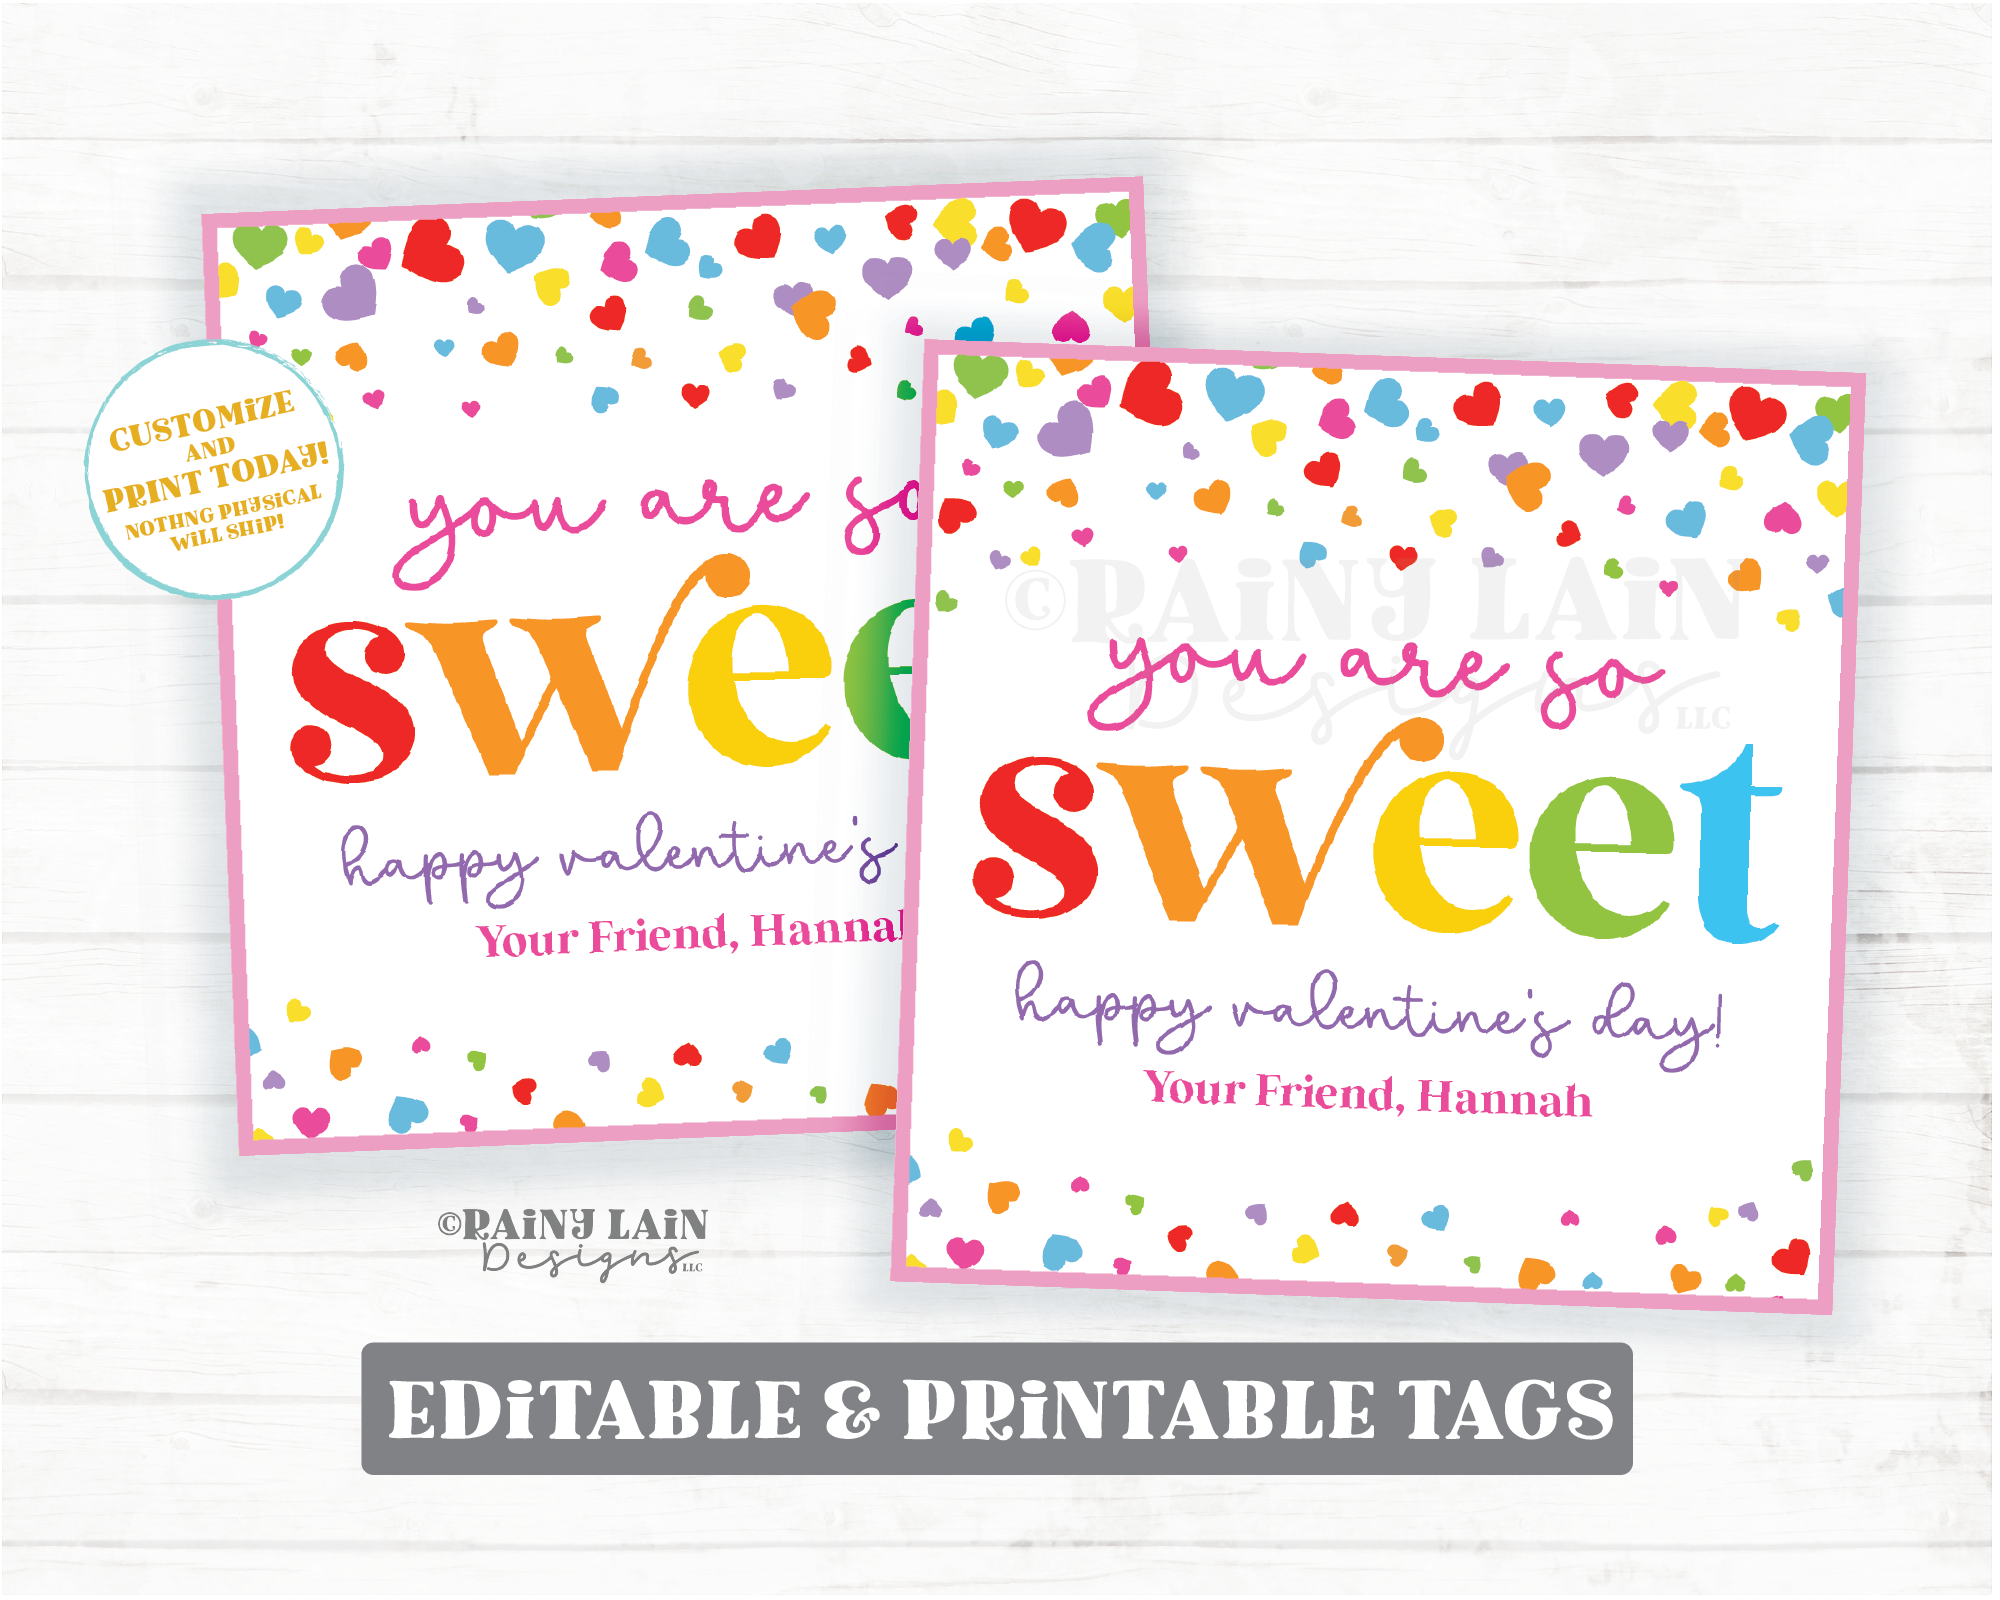 You Are So Sweet Valentine Tags Valentine's Day Treat Homemade Gift Preschool Classroom Friend Printable Kids Easy Non-Candy Teacher